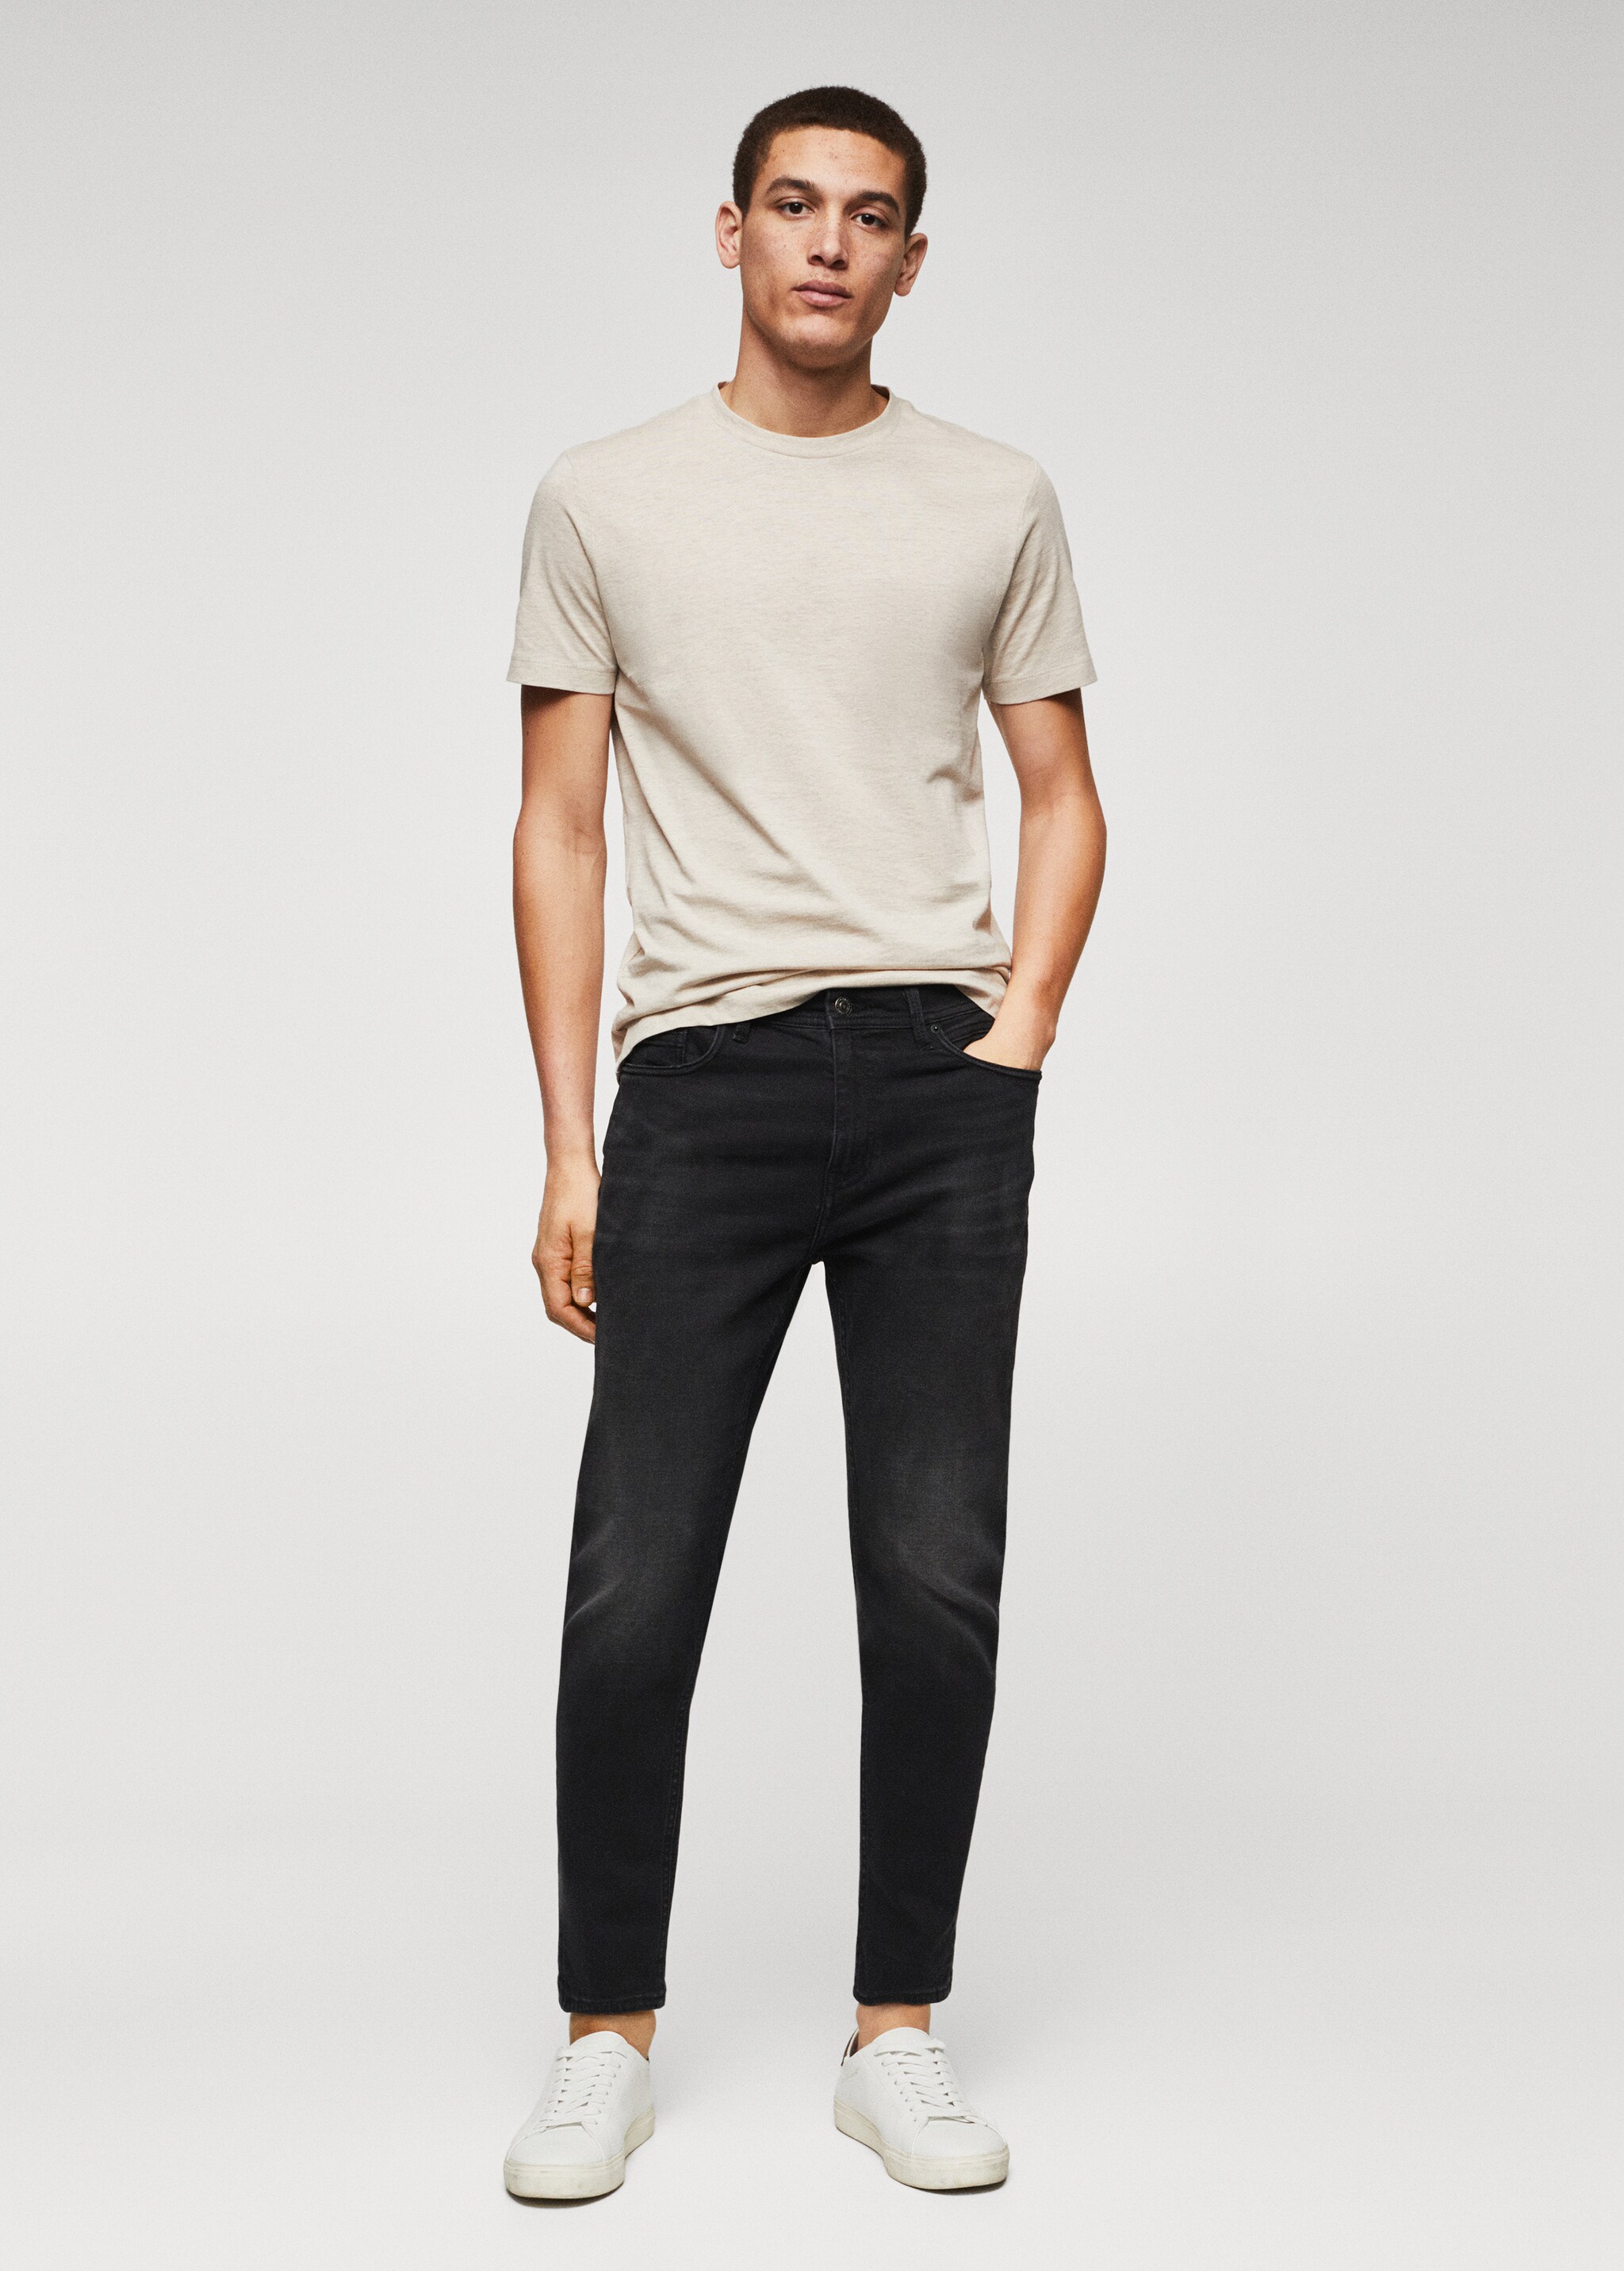 Tom tapered cropped jeans - General plane